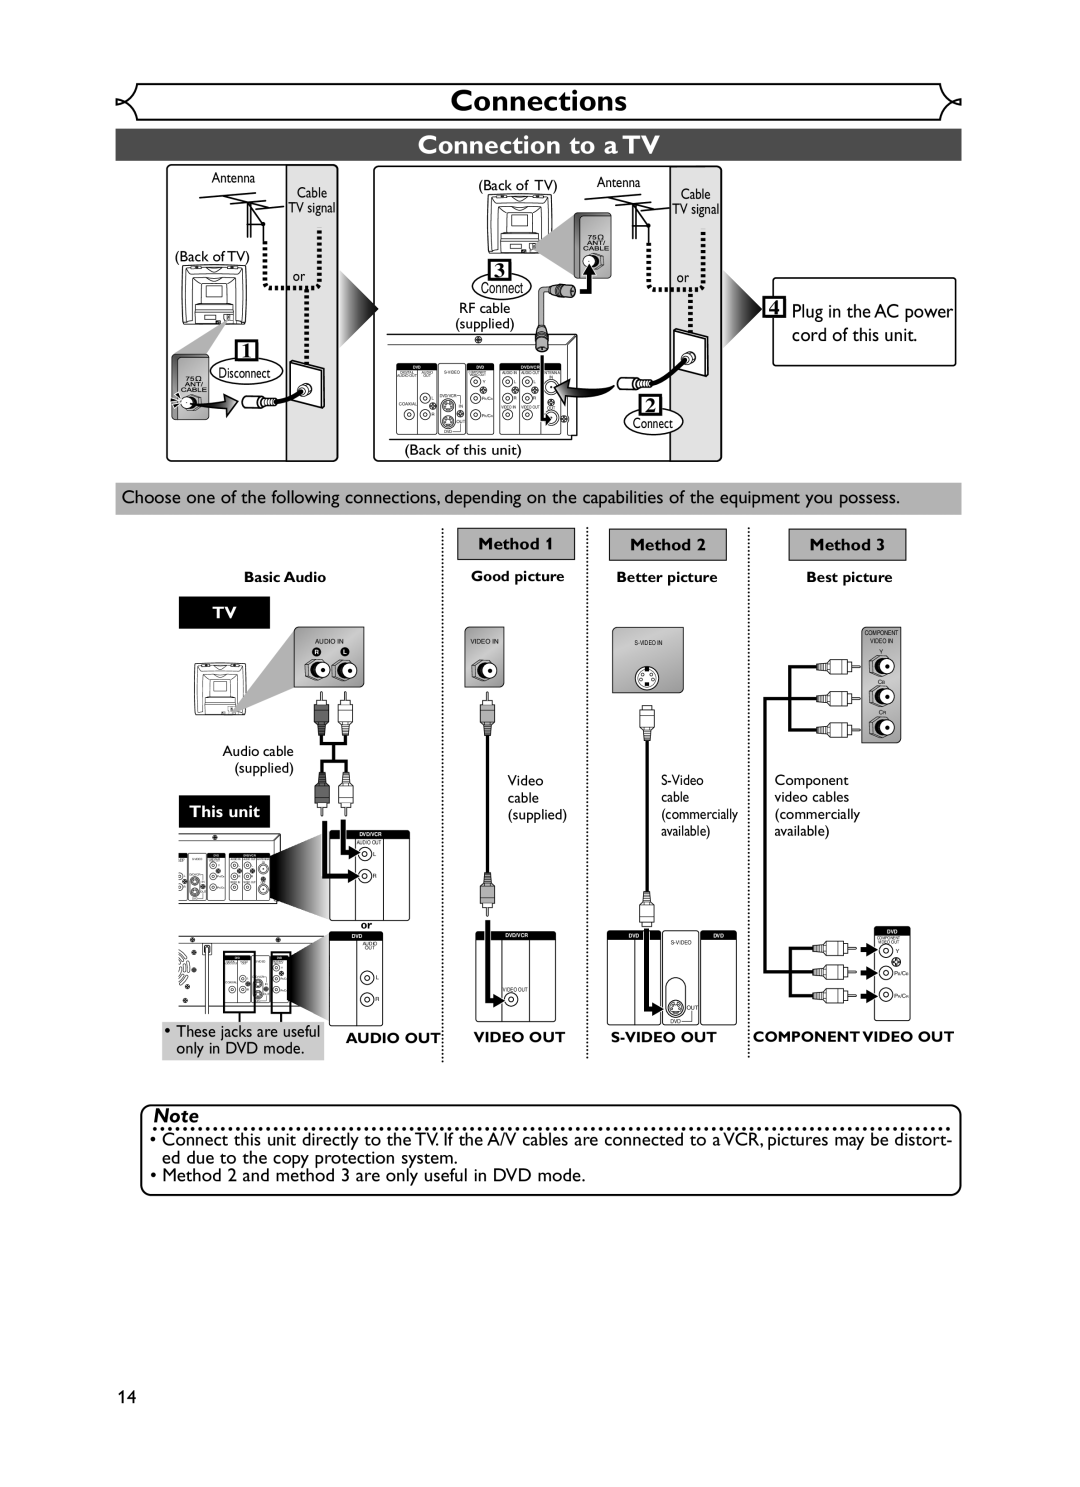 Emerson EWR20V5 owner manual Connections, Connection to a TV, cord of this unit 